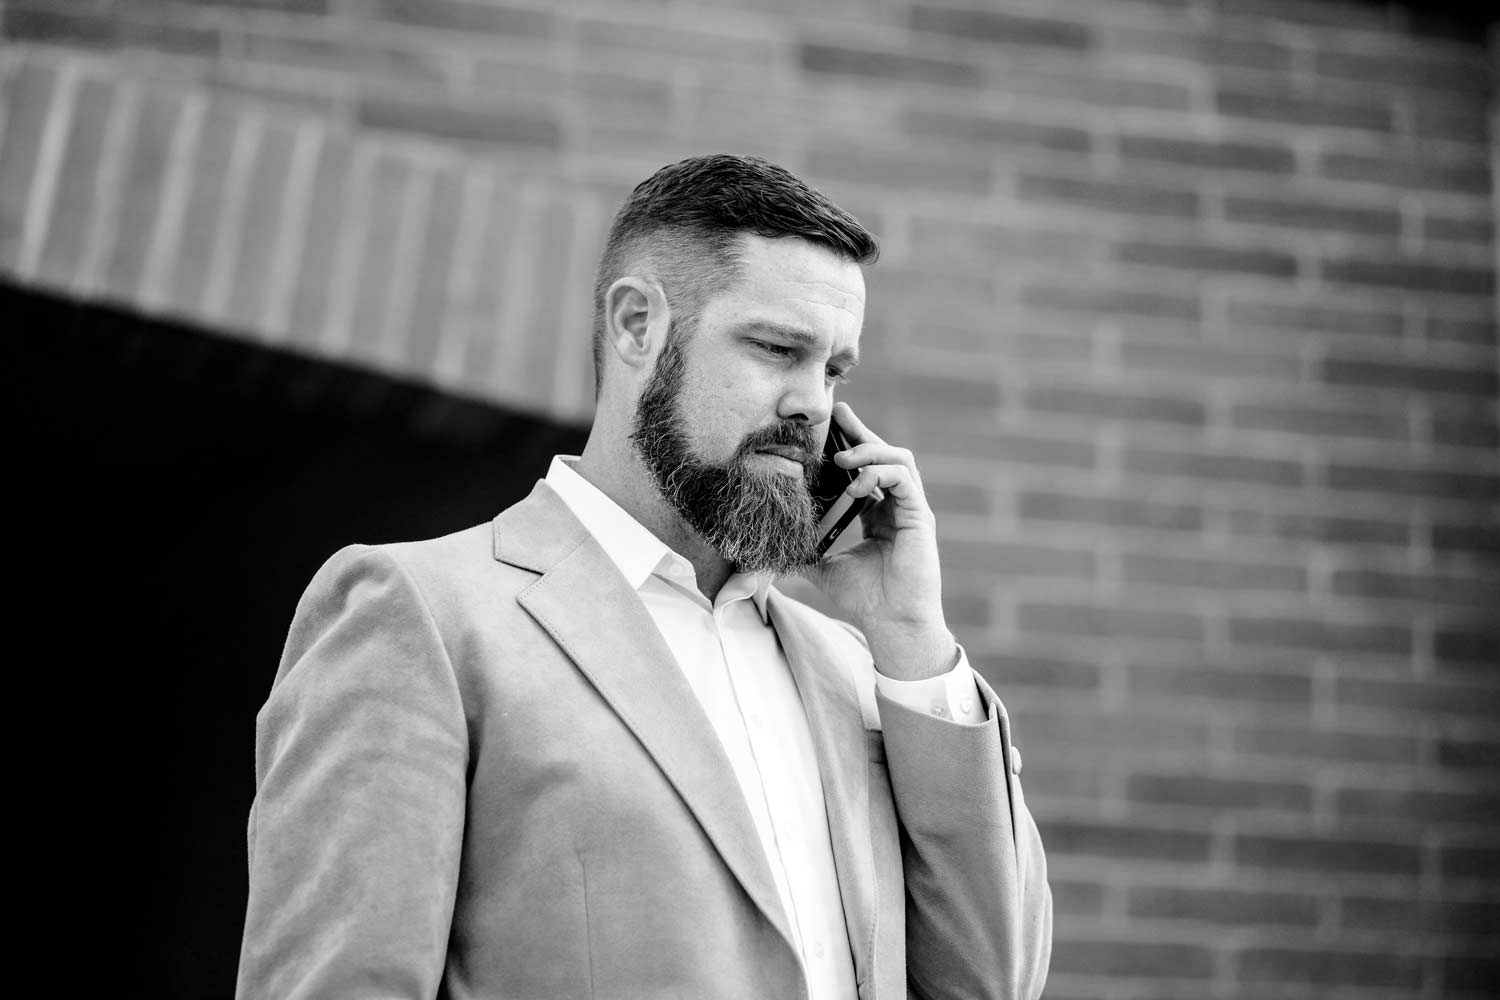 middle aged business man talking on cell phone important call suit jacket no tie beard black and white with brick backdrop coming out of tunnel personal brand financial advisor memphis tennessee by prefocus solutions